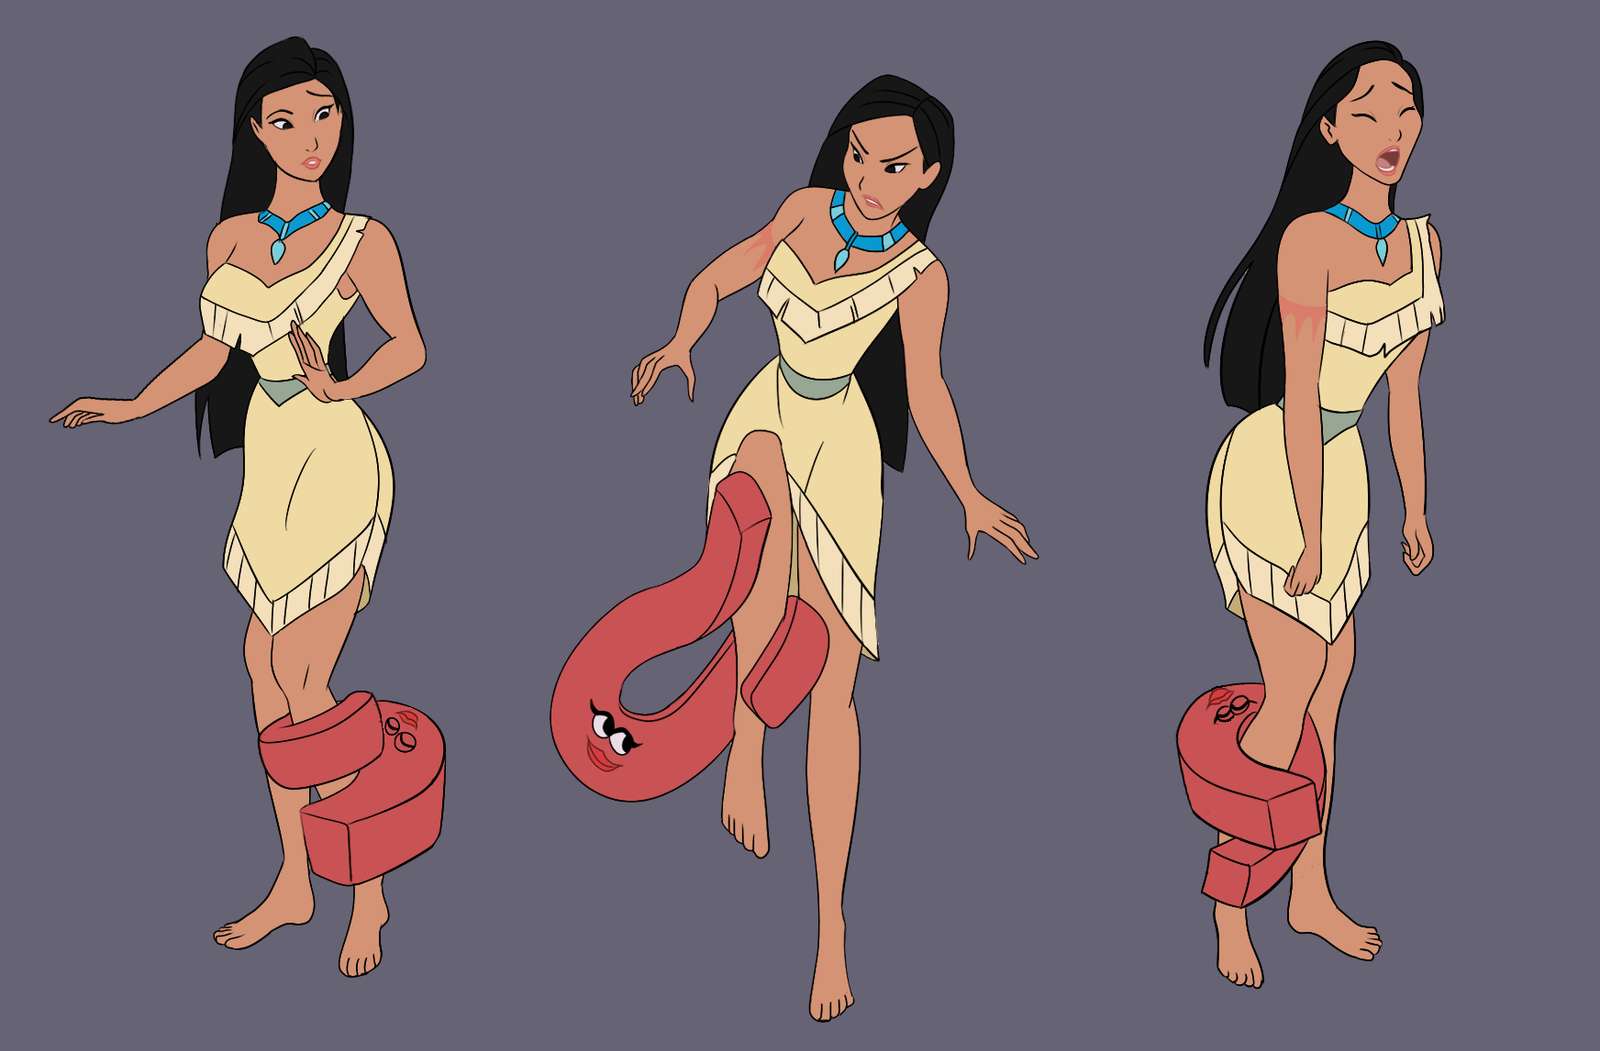 Pocahontas and the Letter U online puzzle